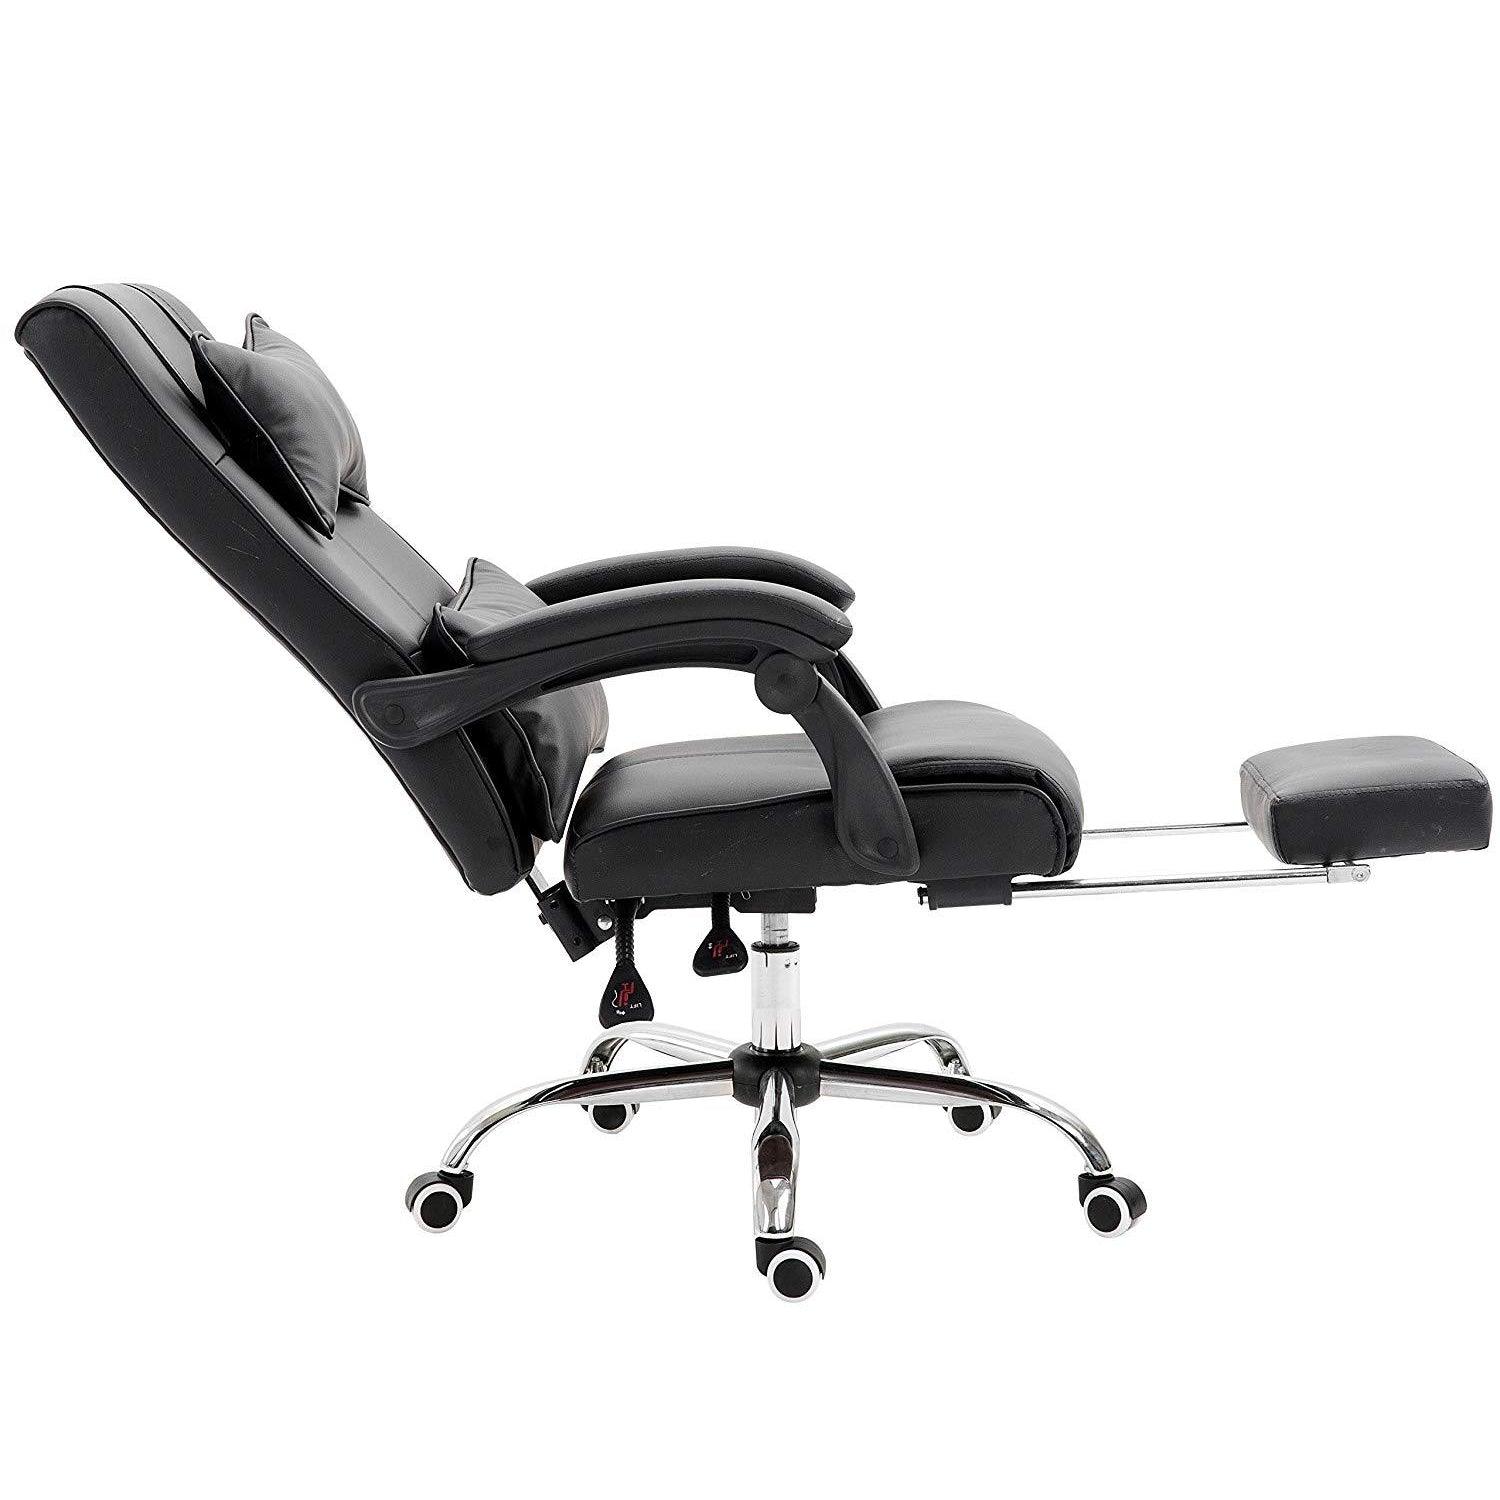 Lawrence Executive Reclining Chair with Foot and Headrest in Black